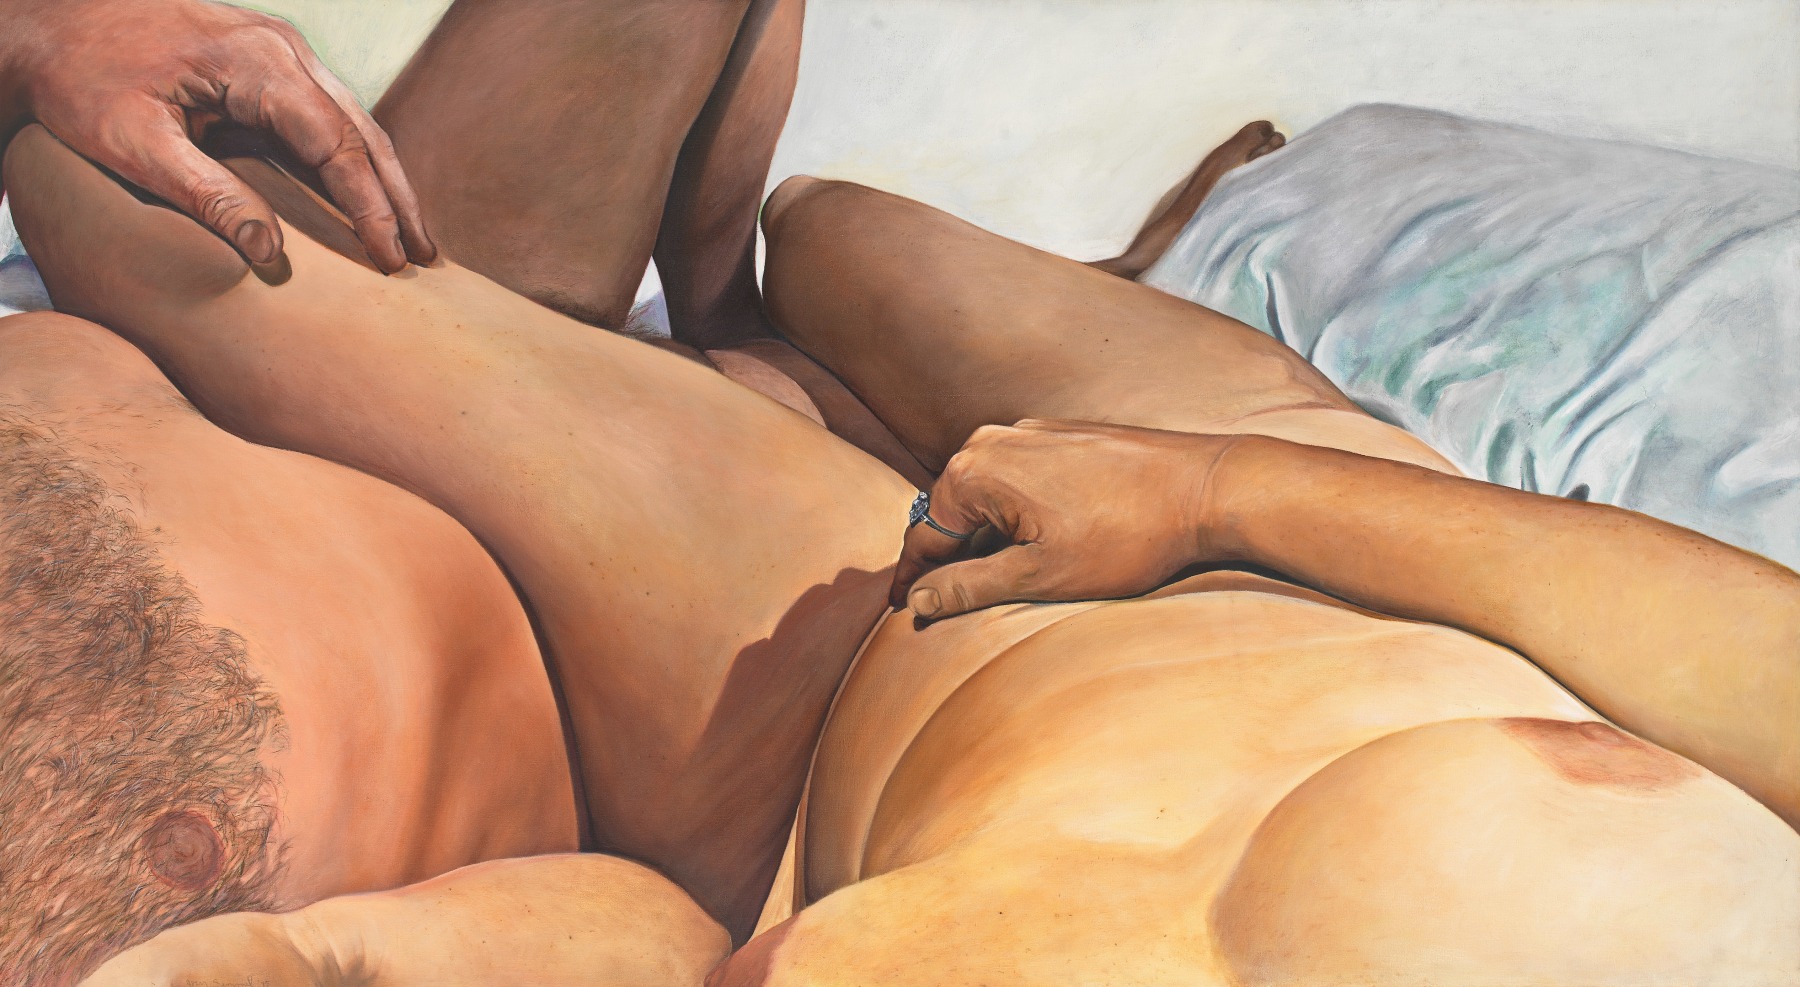 Touch, 1975, Oil on canvas